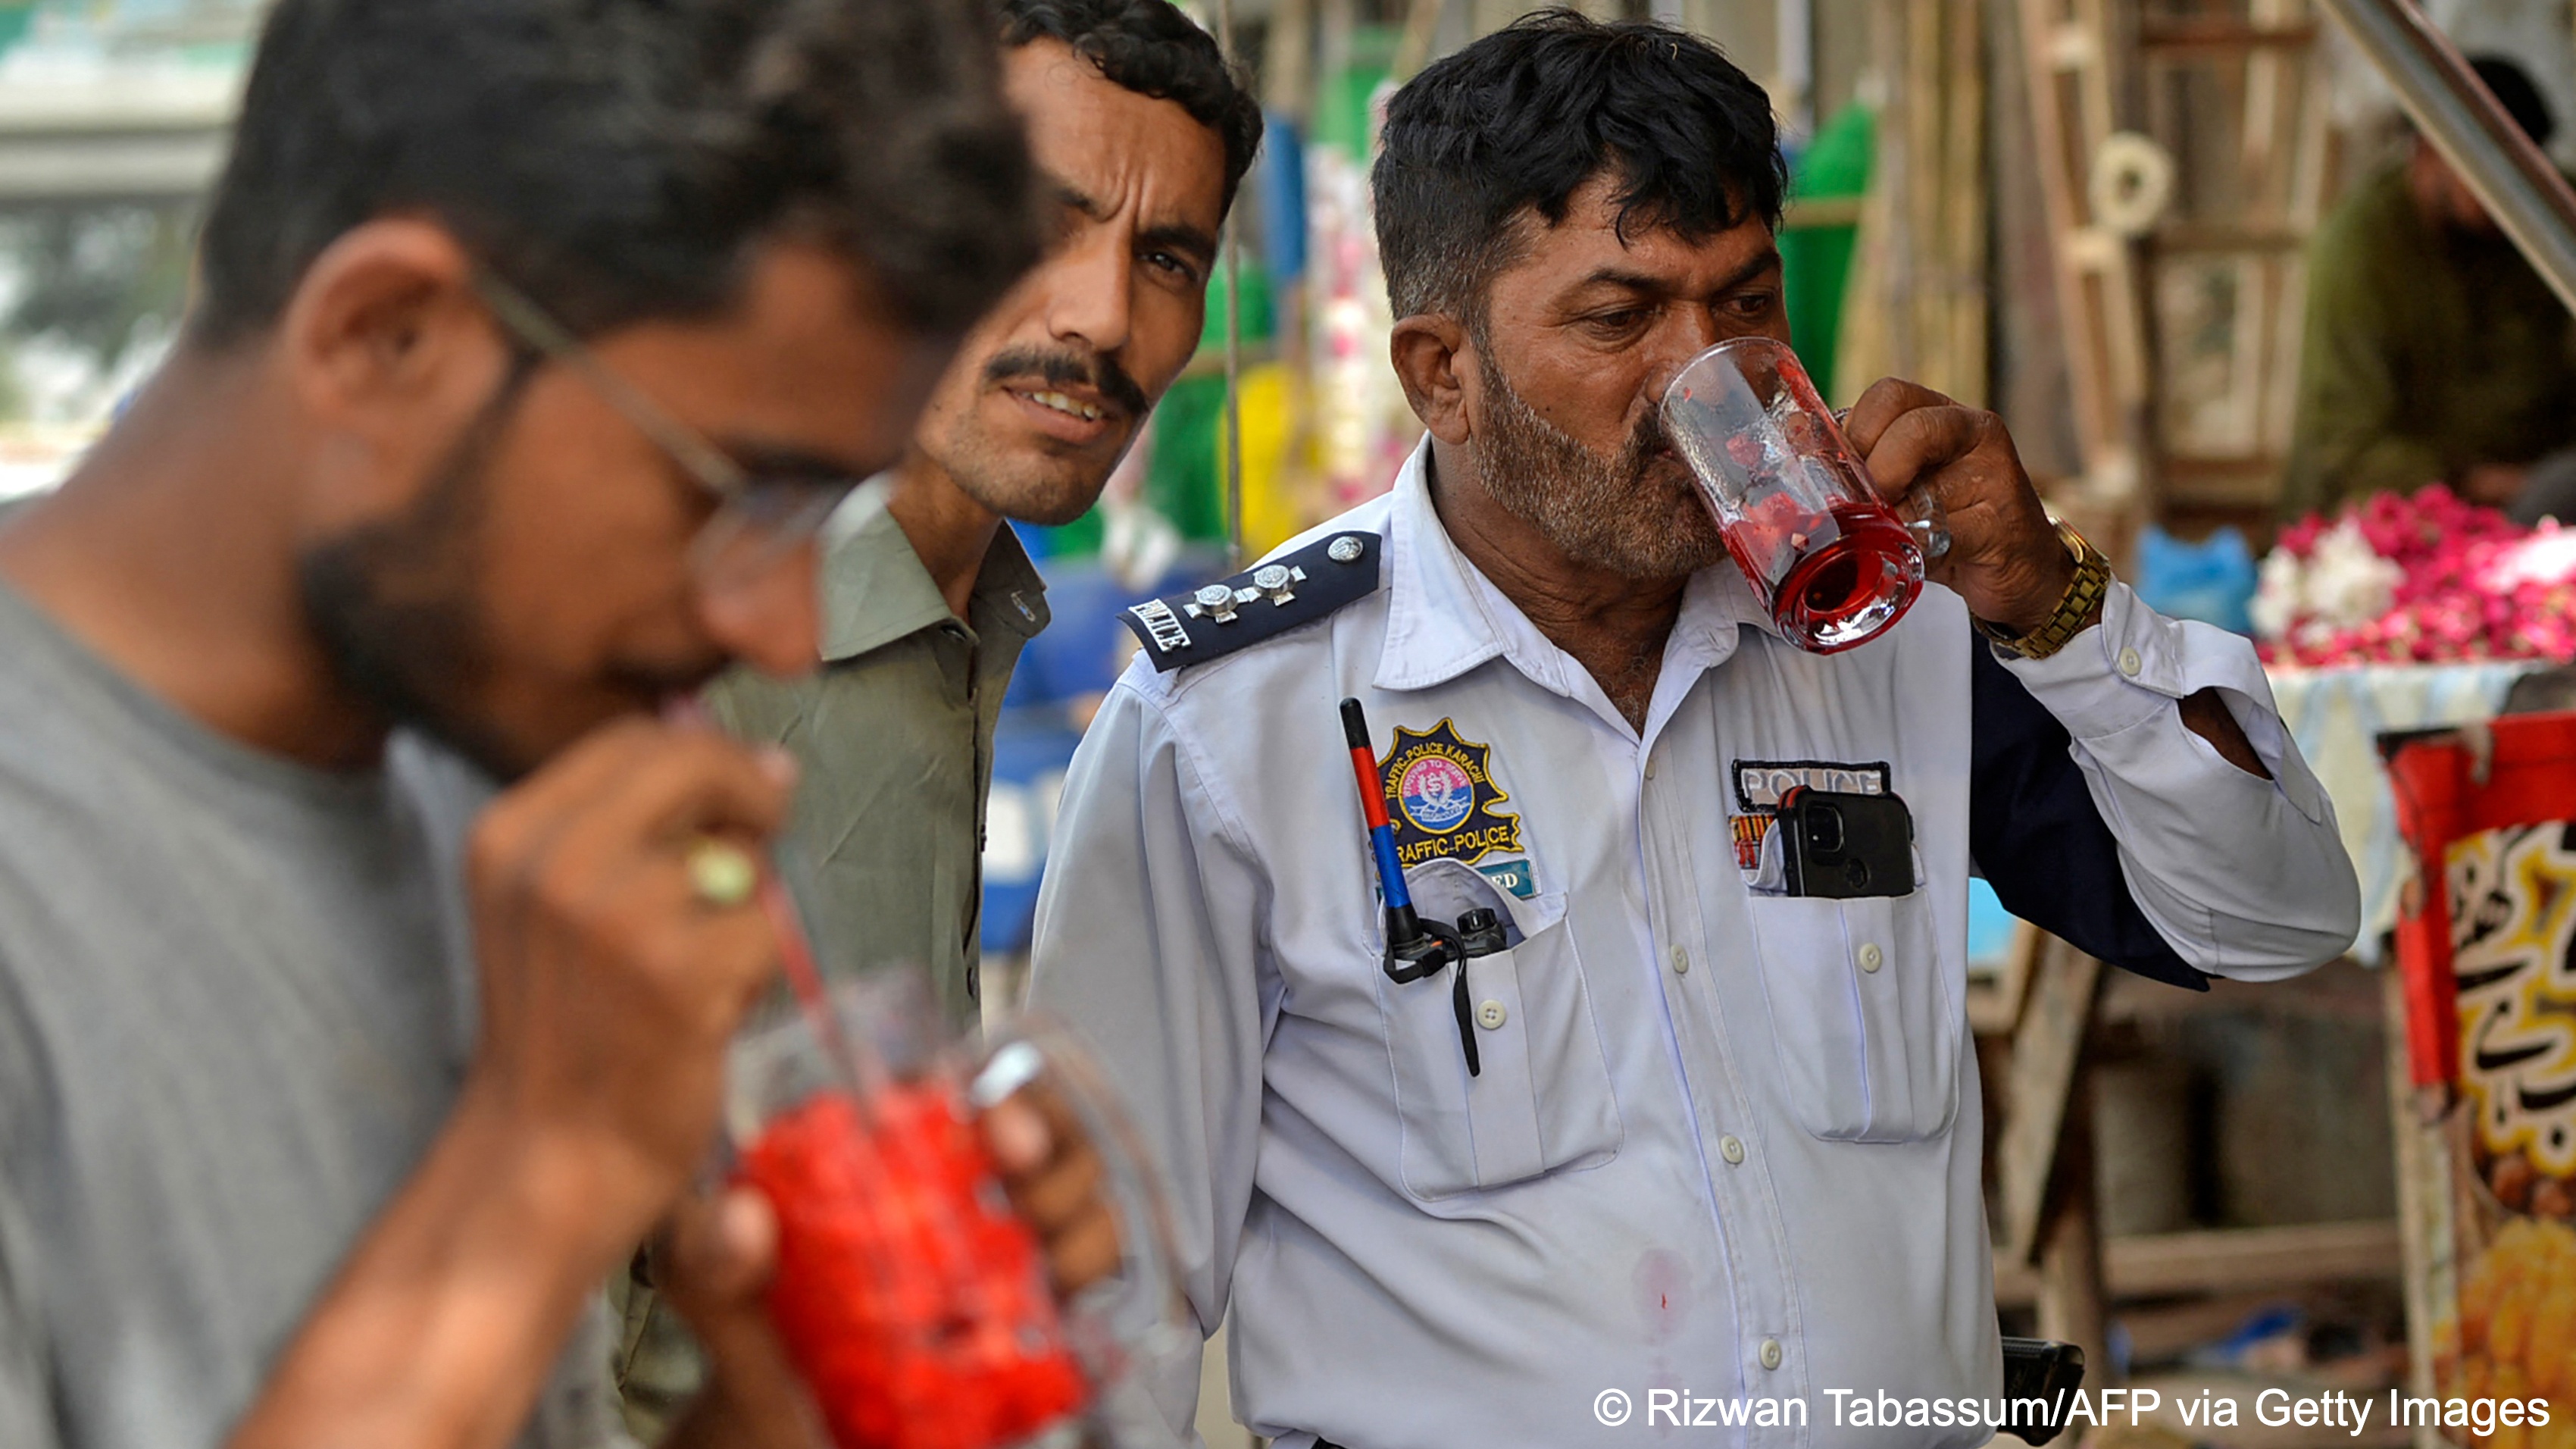 Three men, one of them a policeman, quench their thirst with glasses of Rooh Afza in Karachi (photo: